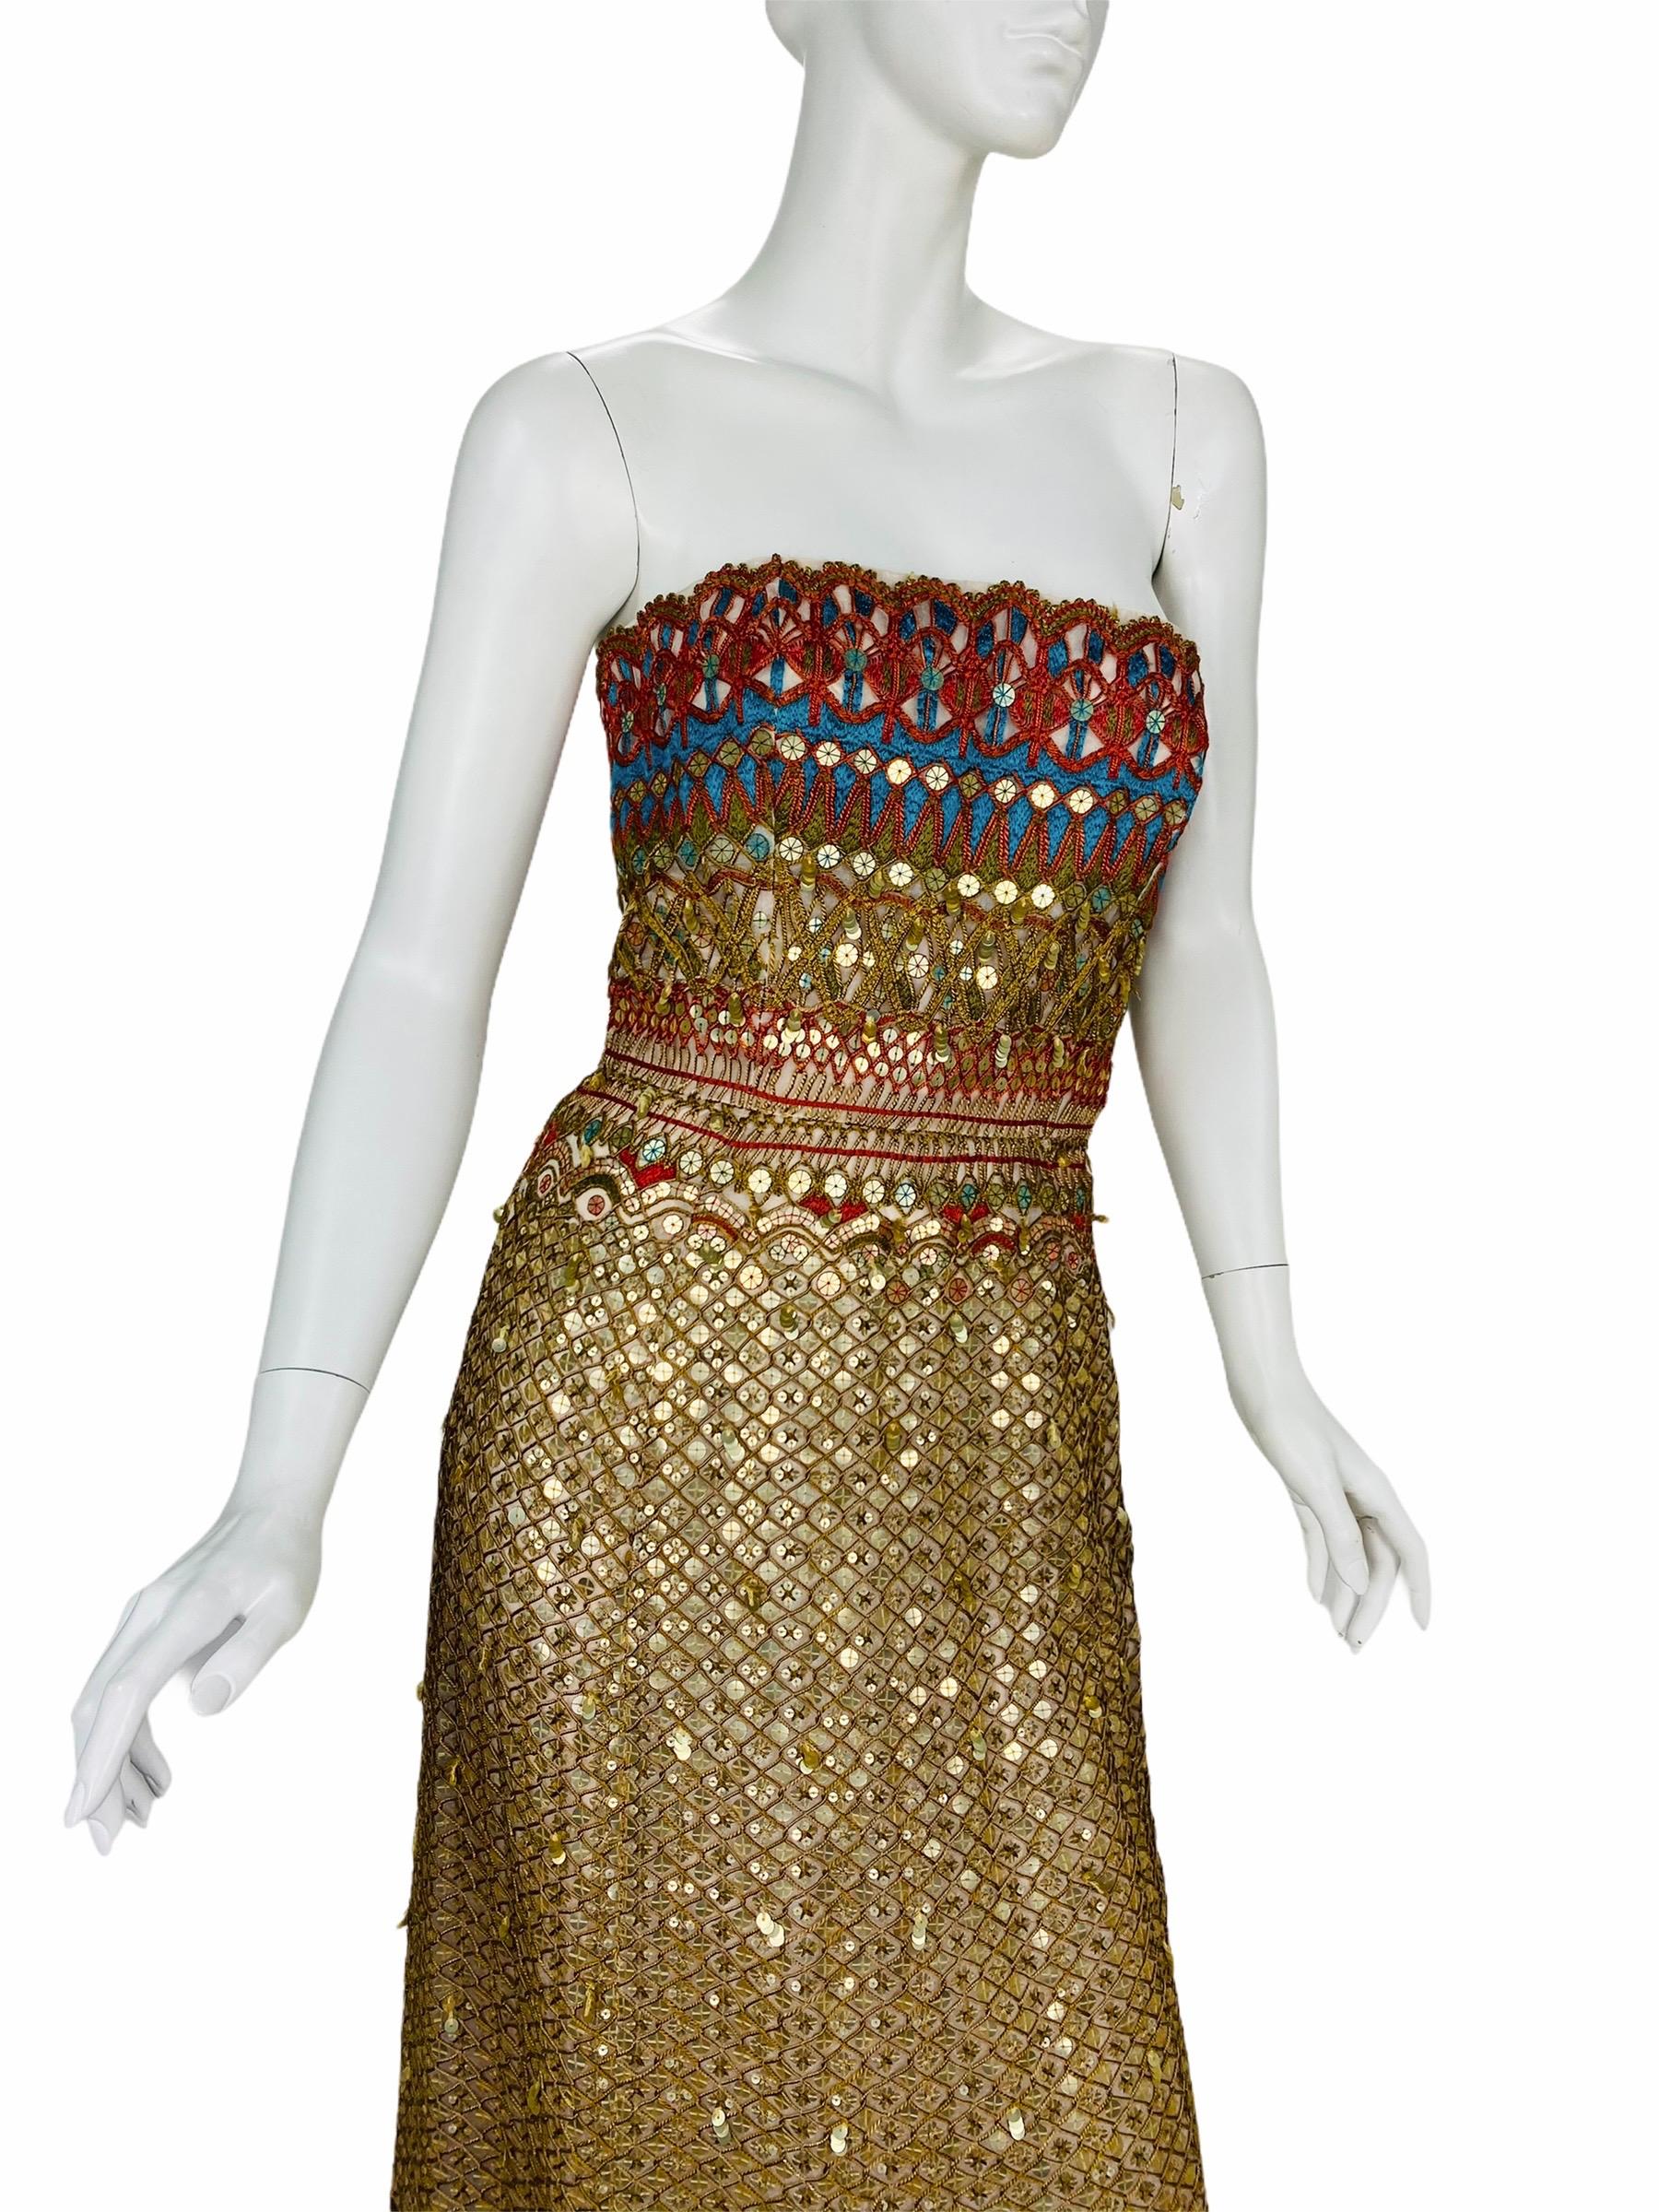 OSCAR DE LA RENTA

Embroidered and sequined evening gown.
Spring 2010, ready-to-wear.
The same gown was worn to the 2010 SAG Awards by Nicole Kidman.

Also, it was featured in SCAD Museum!

Extremely rare and highly collectible.

Size 6

Color: